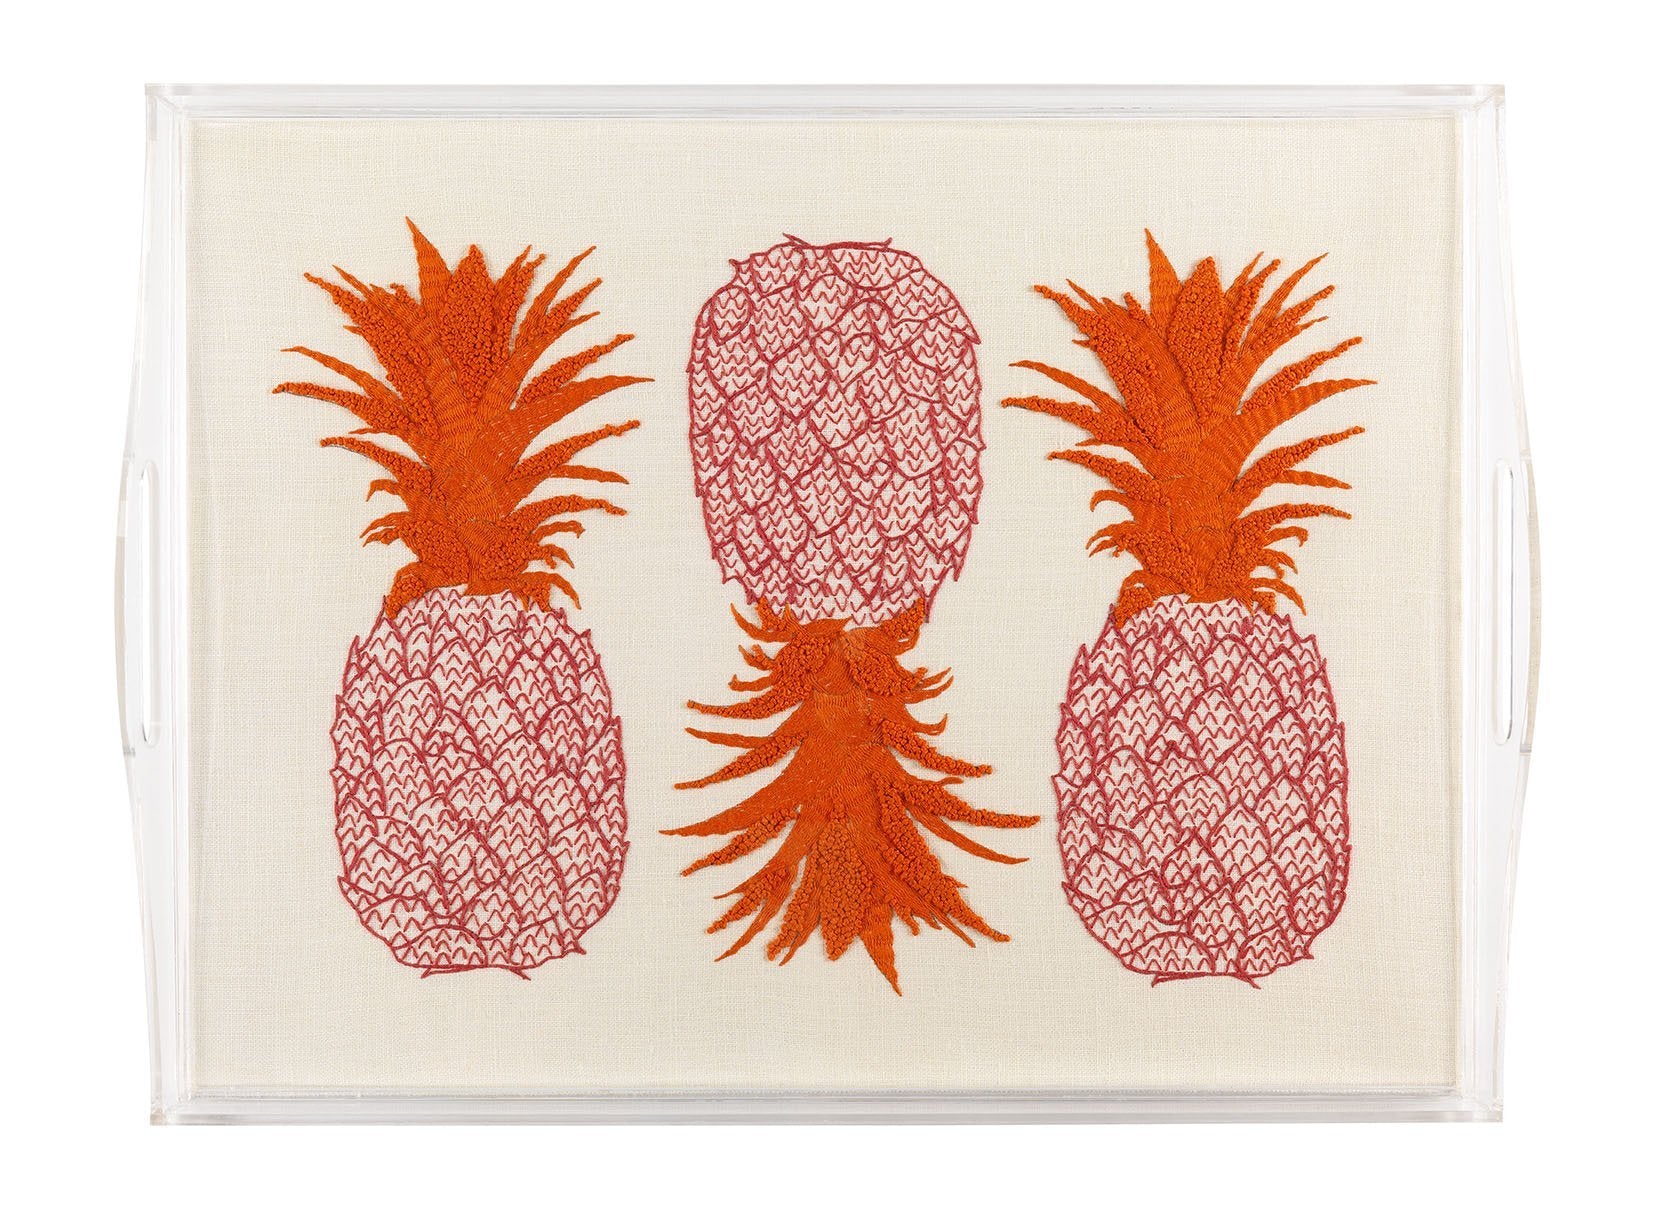 Melissa Wyndham for Fine Cell Work Pineapple Embroidered Tea Tray Pink and Orange